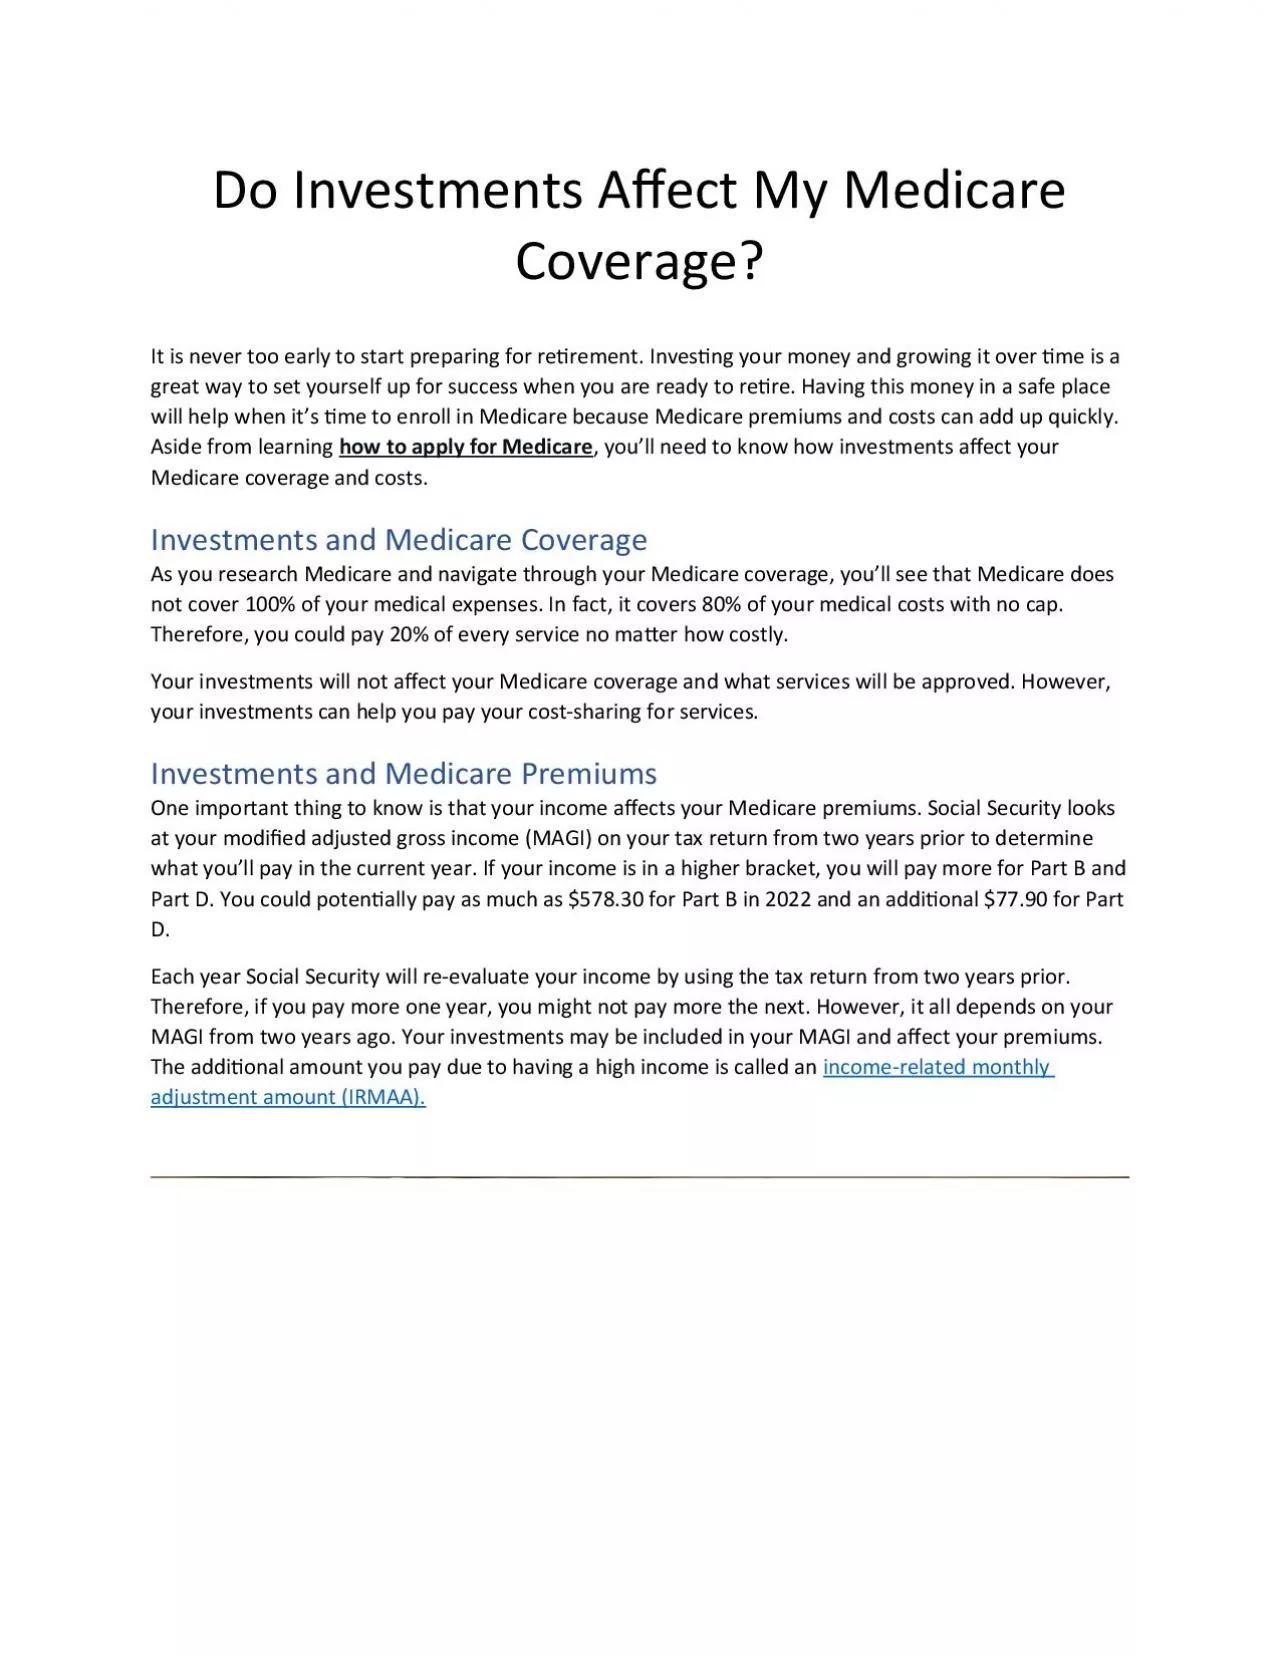 Do Investments Affect My Medicare Coverage?